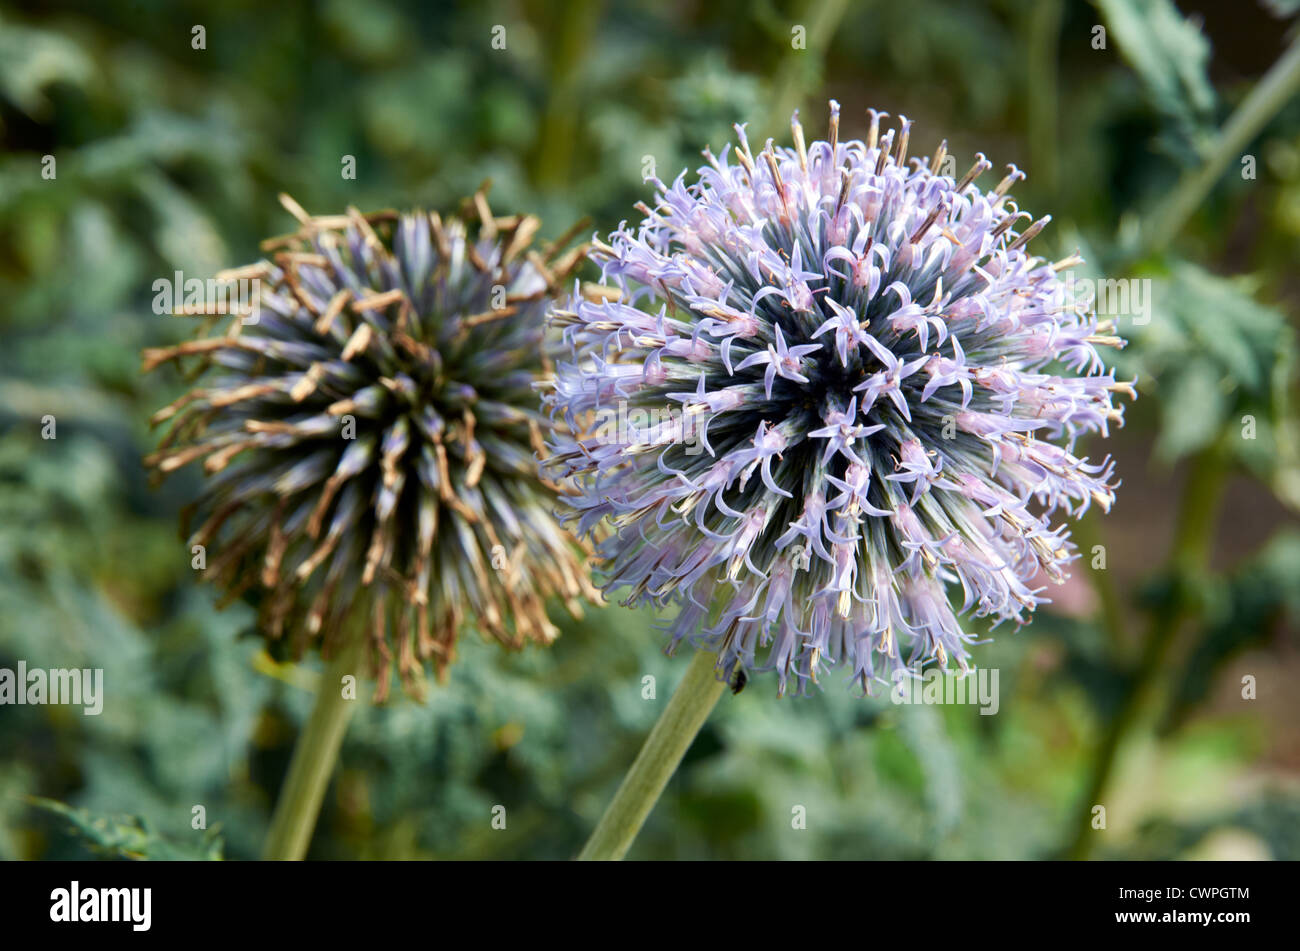 Flower head and seed head of an ornamental globe thistle or Echinops. Stock Photo